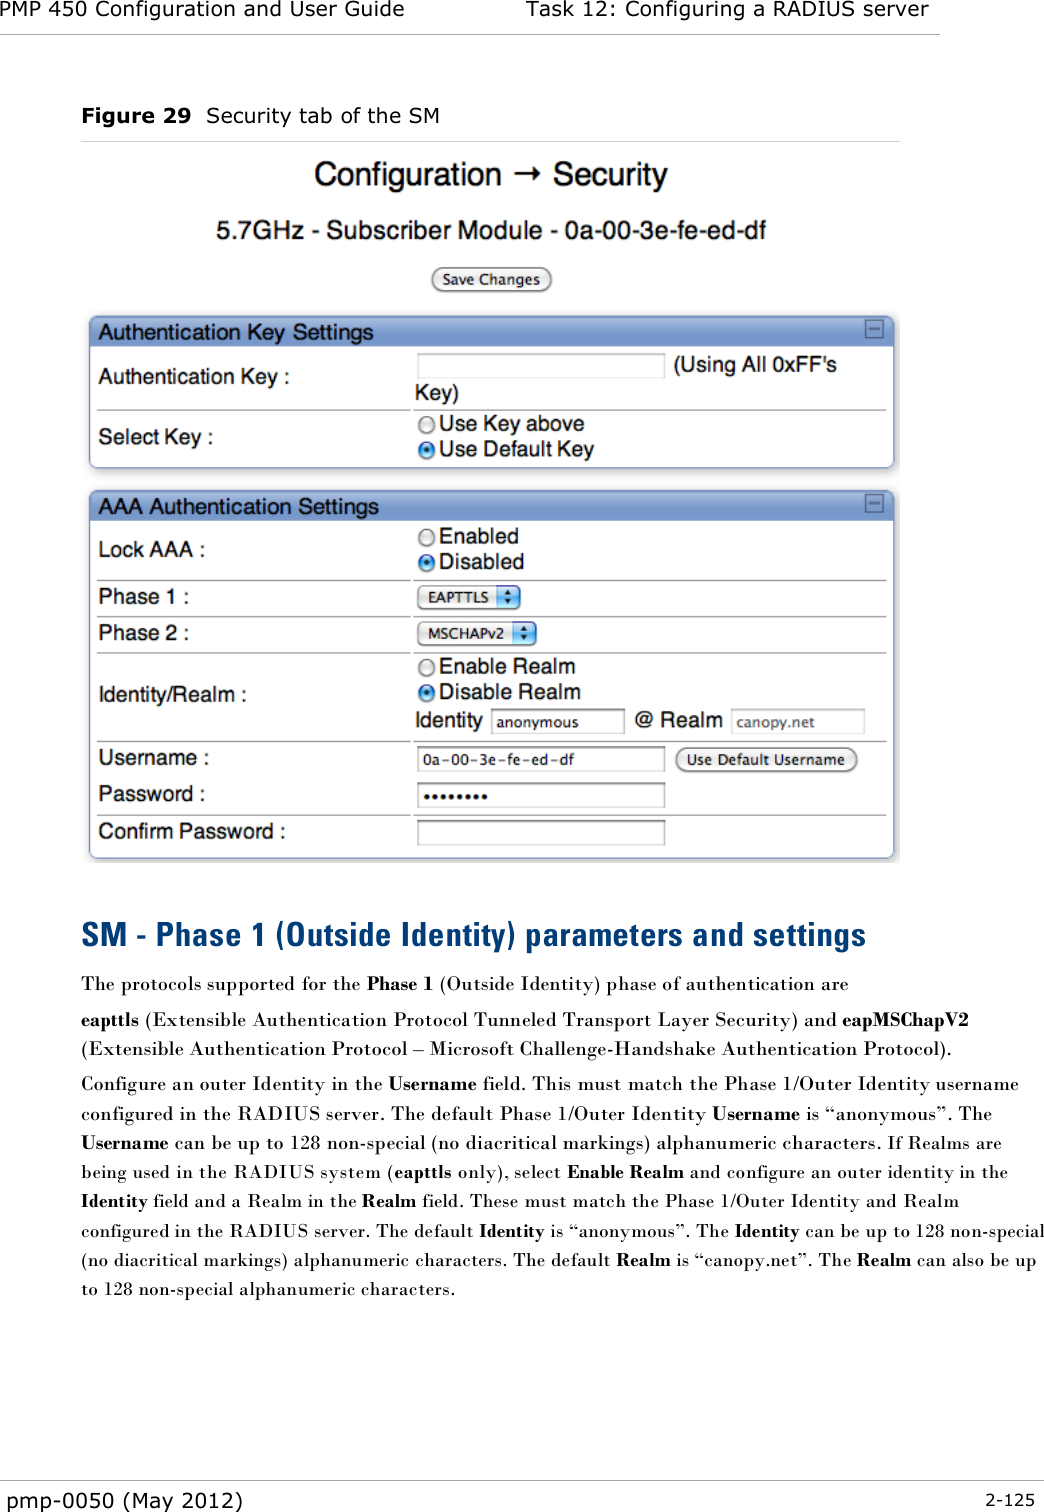 PMP 450 Configuration and User Guide Task 12: Configuring a RADIUS server  pmp-0050 (May 2012)  2-125  Figure 29  Security tab of the SM   SM - Phase 1 (Outside Identity) parameters and settings The protocols supported for the Phase 1 (Outside Identity) phase of authentication are eapttls (Extensible Authentication Protocol Tunneled Transport Layer Security) and eapMSChapV2 (Extensible Authentication Protocol – Microsoft Challenge-Handshake Authentication Protocol). Configure an outer Identity in the Username field. This must match the Phase 1/Outer Identity username configured in the RADIUS server. The default Phase 1/Outer Identity Username is ―anonymous‖. The Username can be up to 128 non-special (no diacritical markings) alphanumeric characters. If Realms are being used in the RADIUS system (eapttls only), select Enable Realm and configure an outer identity in the Identity field and a Realm in the Realm field. These must match the Phase 1/Outer Identity and Realm configured in the RADIUS server. The default Identity is ―anonymous‖. The Identity can be up to 128 non-special (no diacritical markings) alphanumeric characters. The default Realm is ―canopy.net‖. The Realm can also be up to 128 non-special alphanumeric characters.   